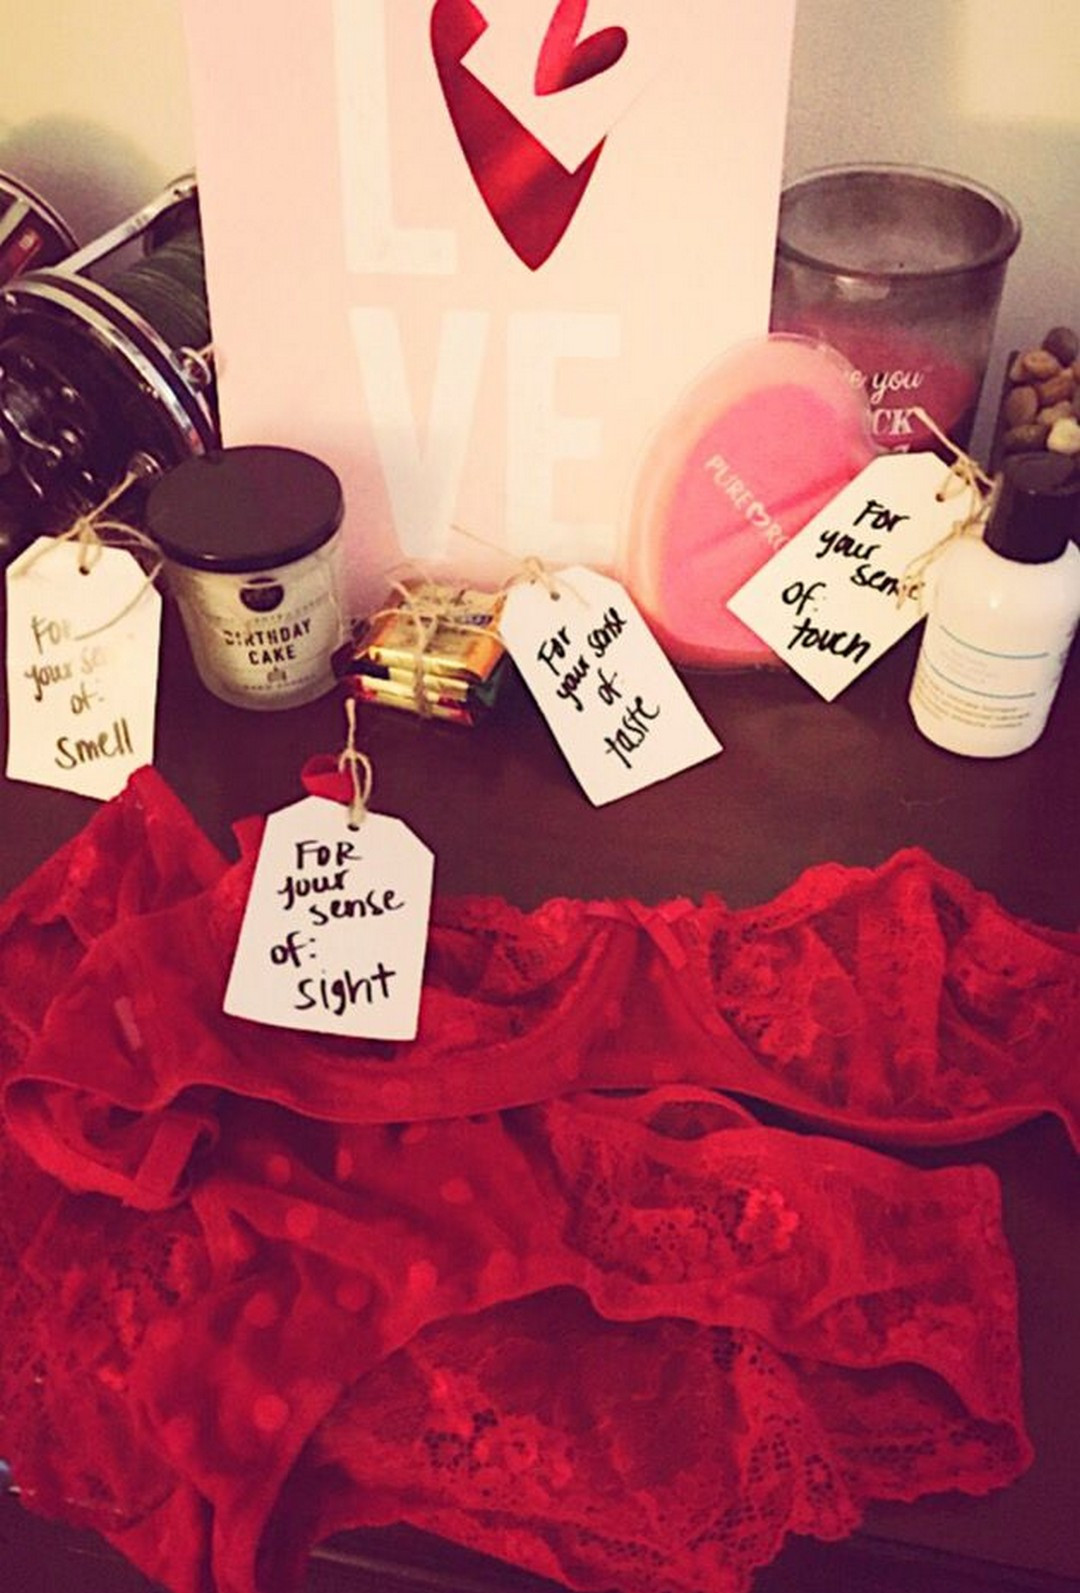 Valentine Gift Ideas For Him Pinterest
 Romantic DIY Valentines Day Gifts For Your Boyfriend